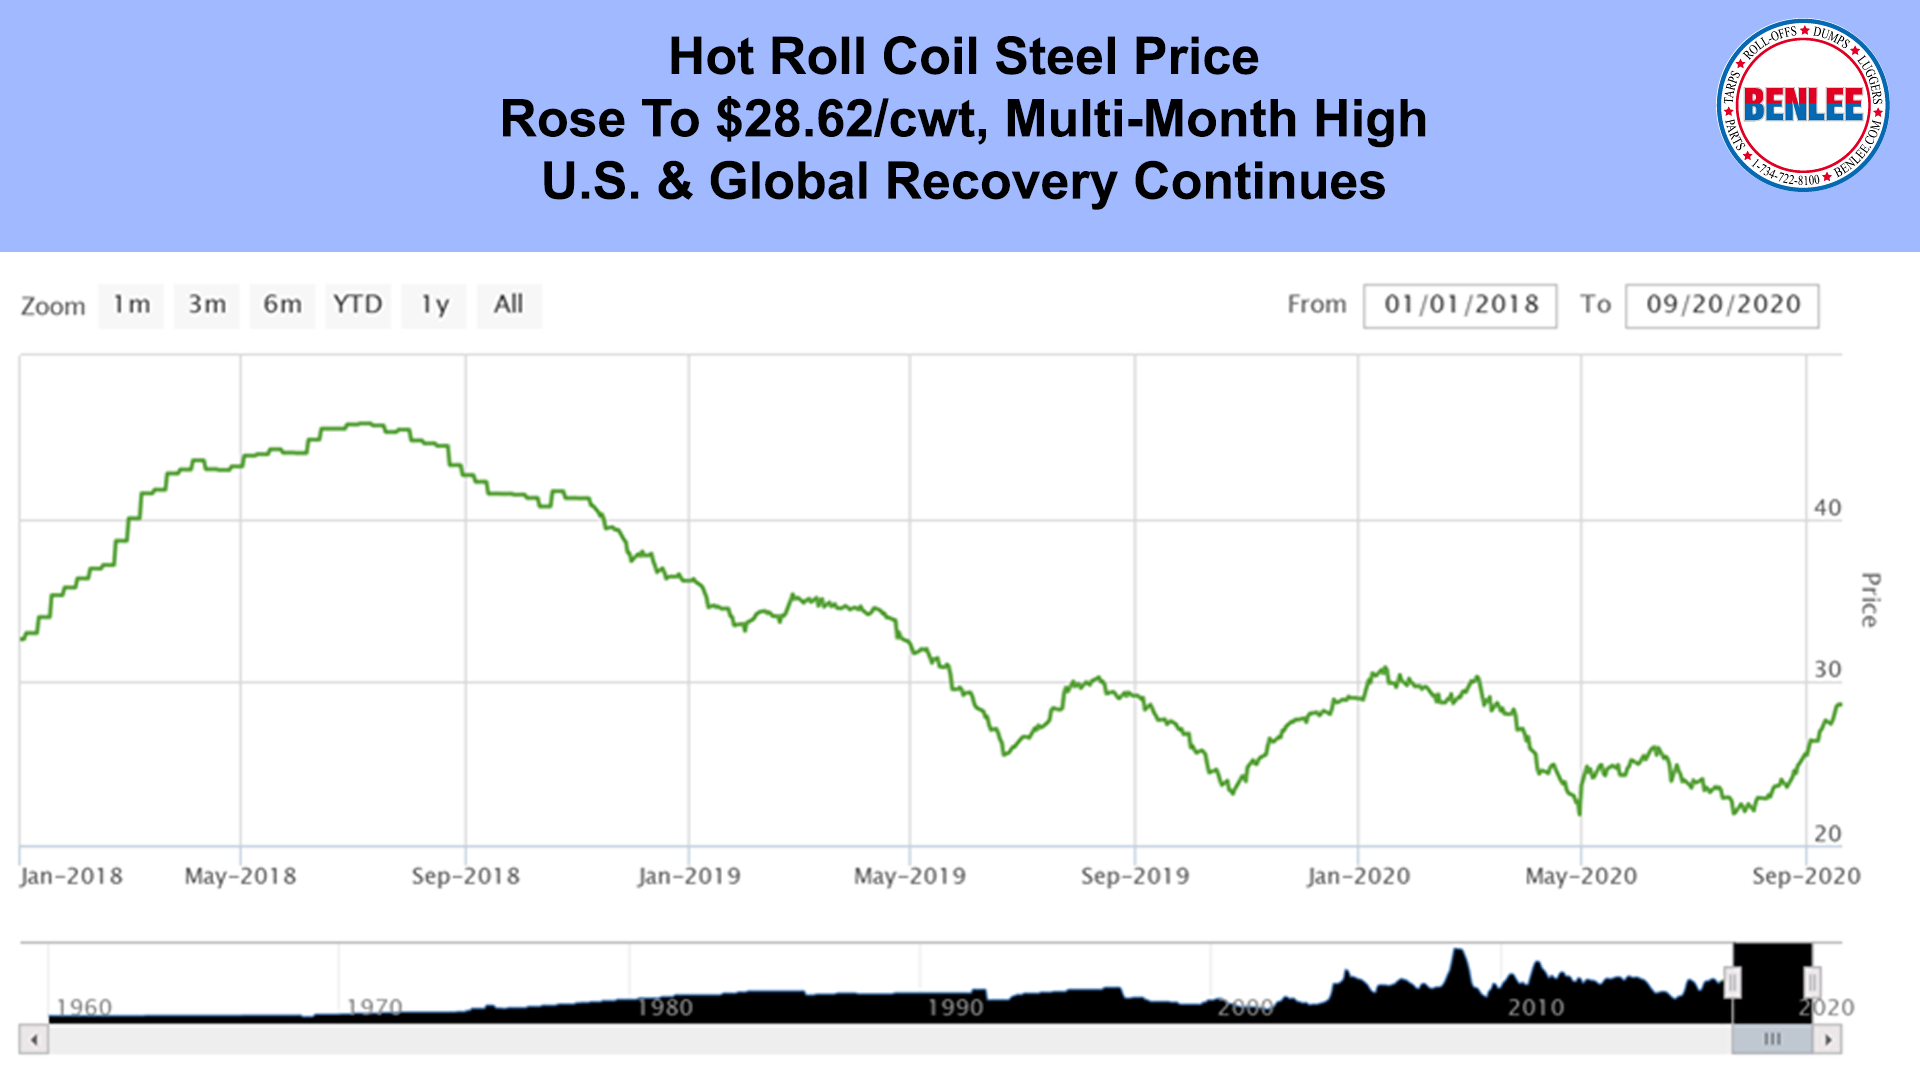 Hot Roll Coil Steel